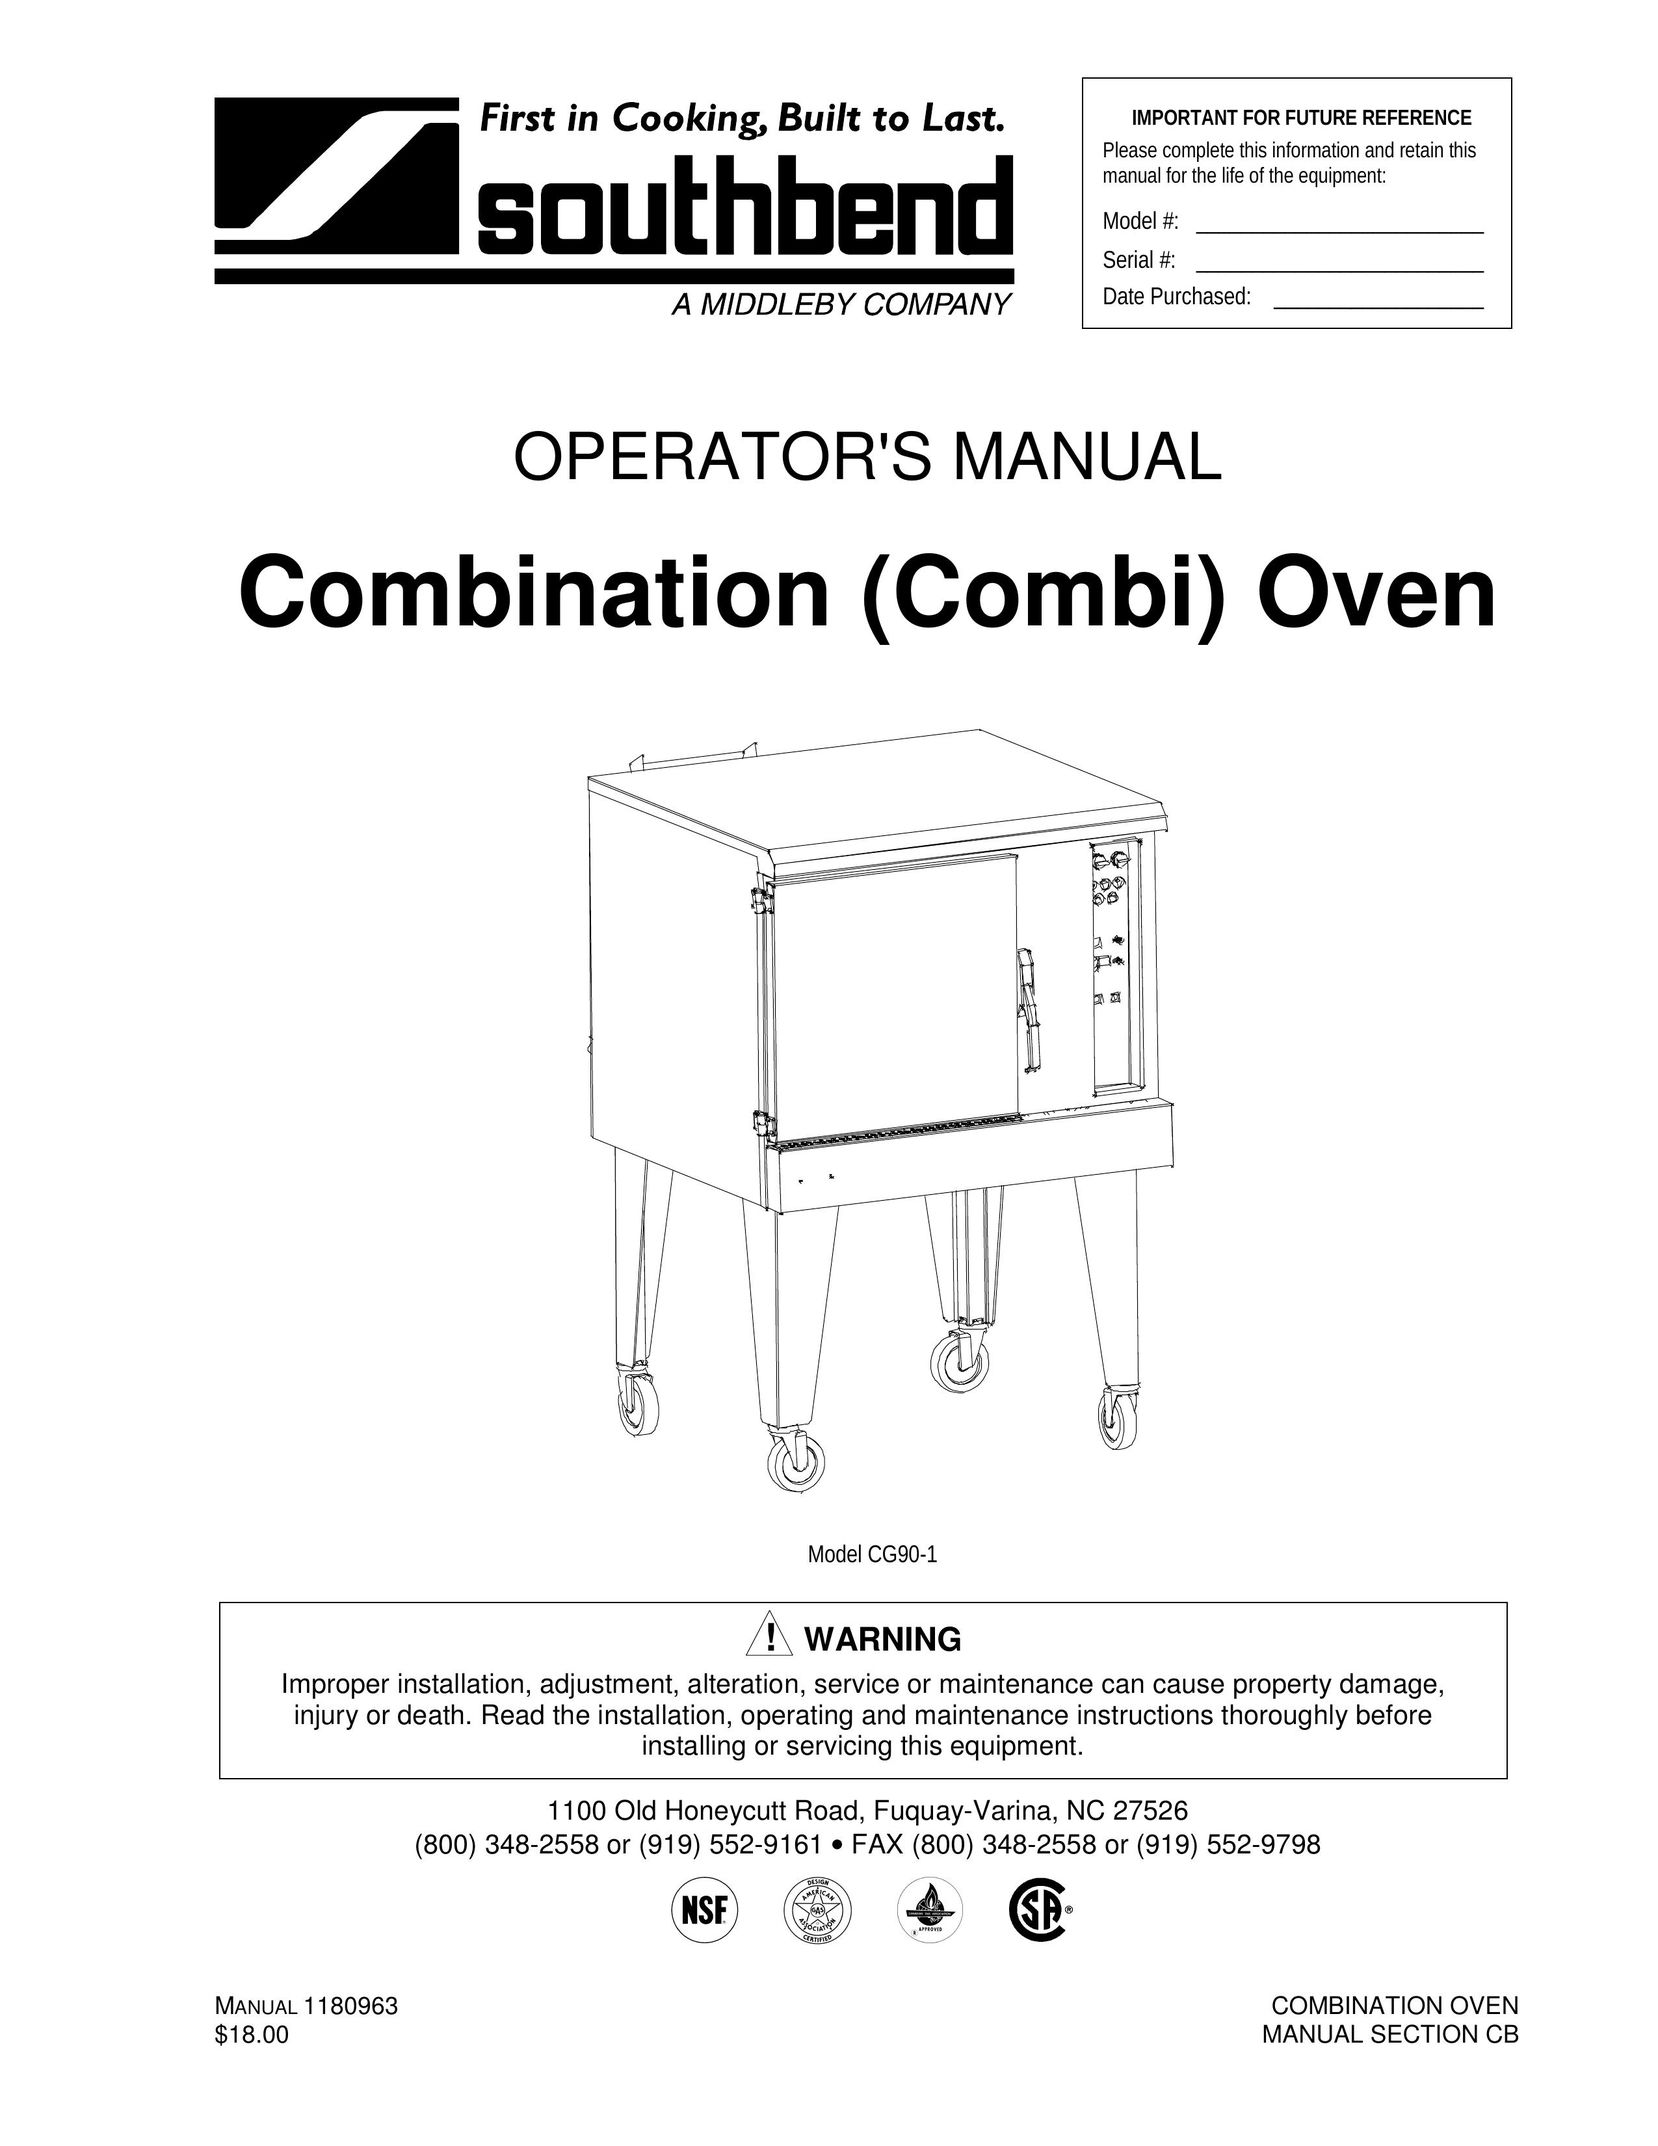 Southbend CG90-1 Oven User Manual